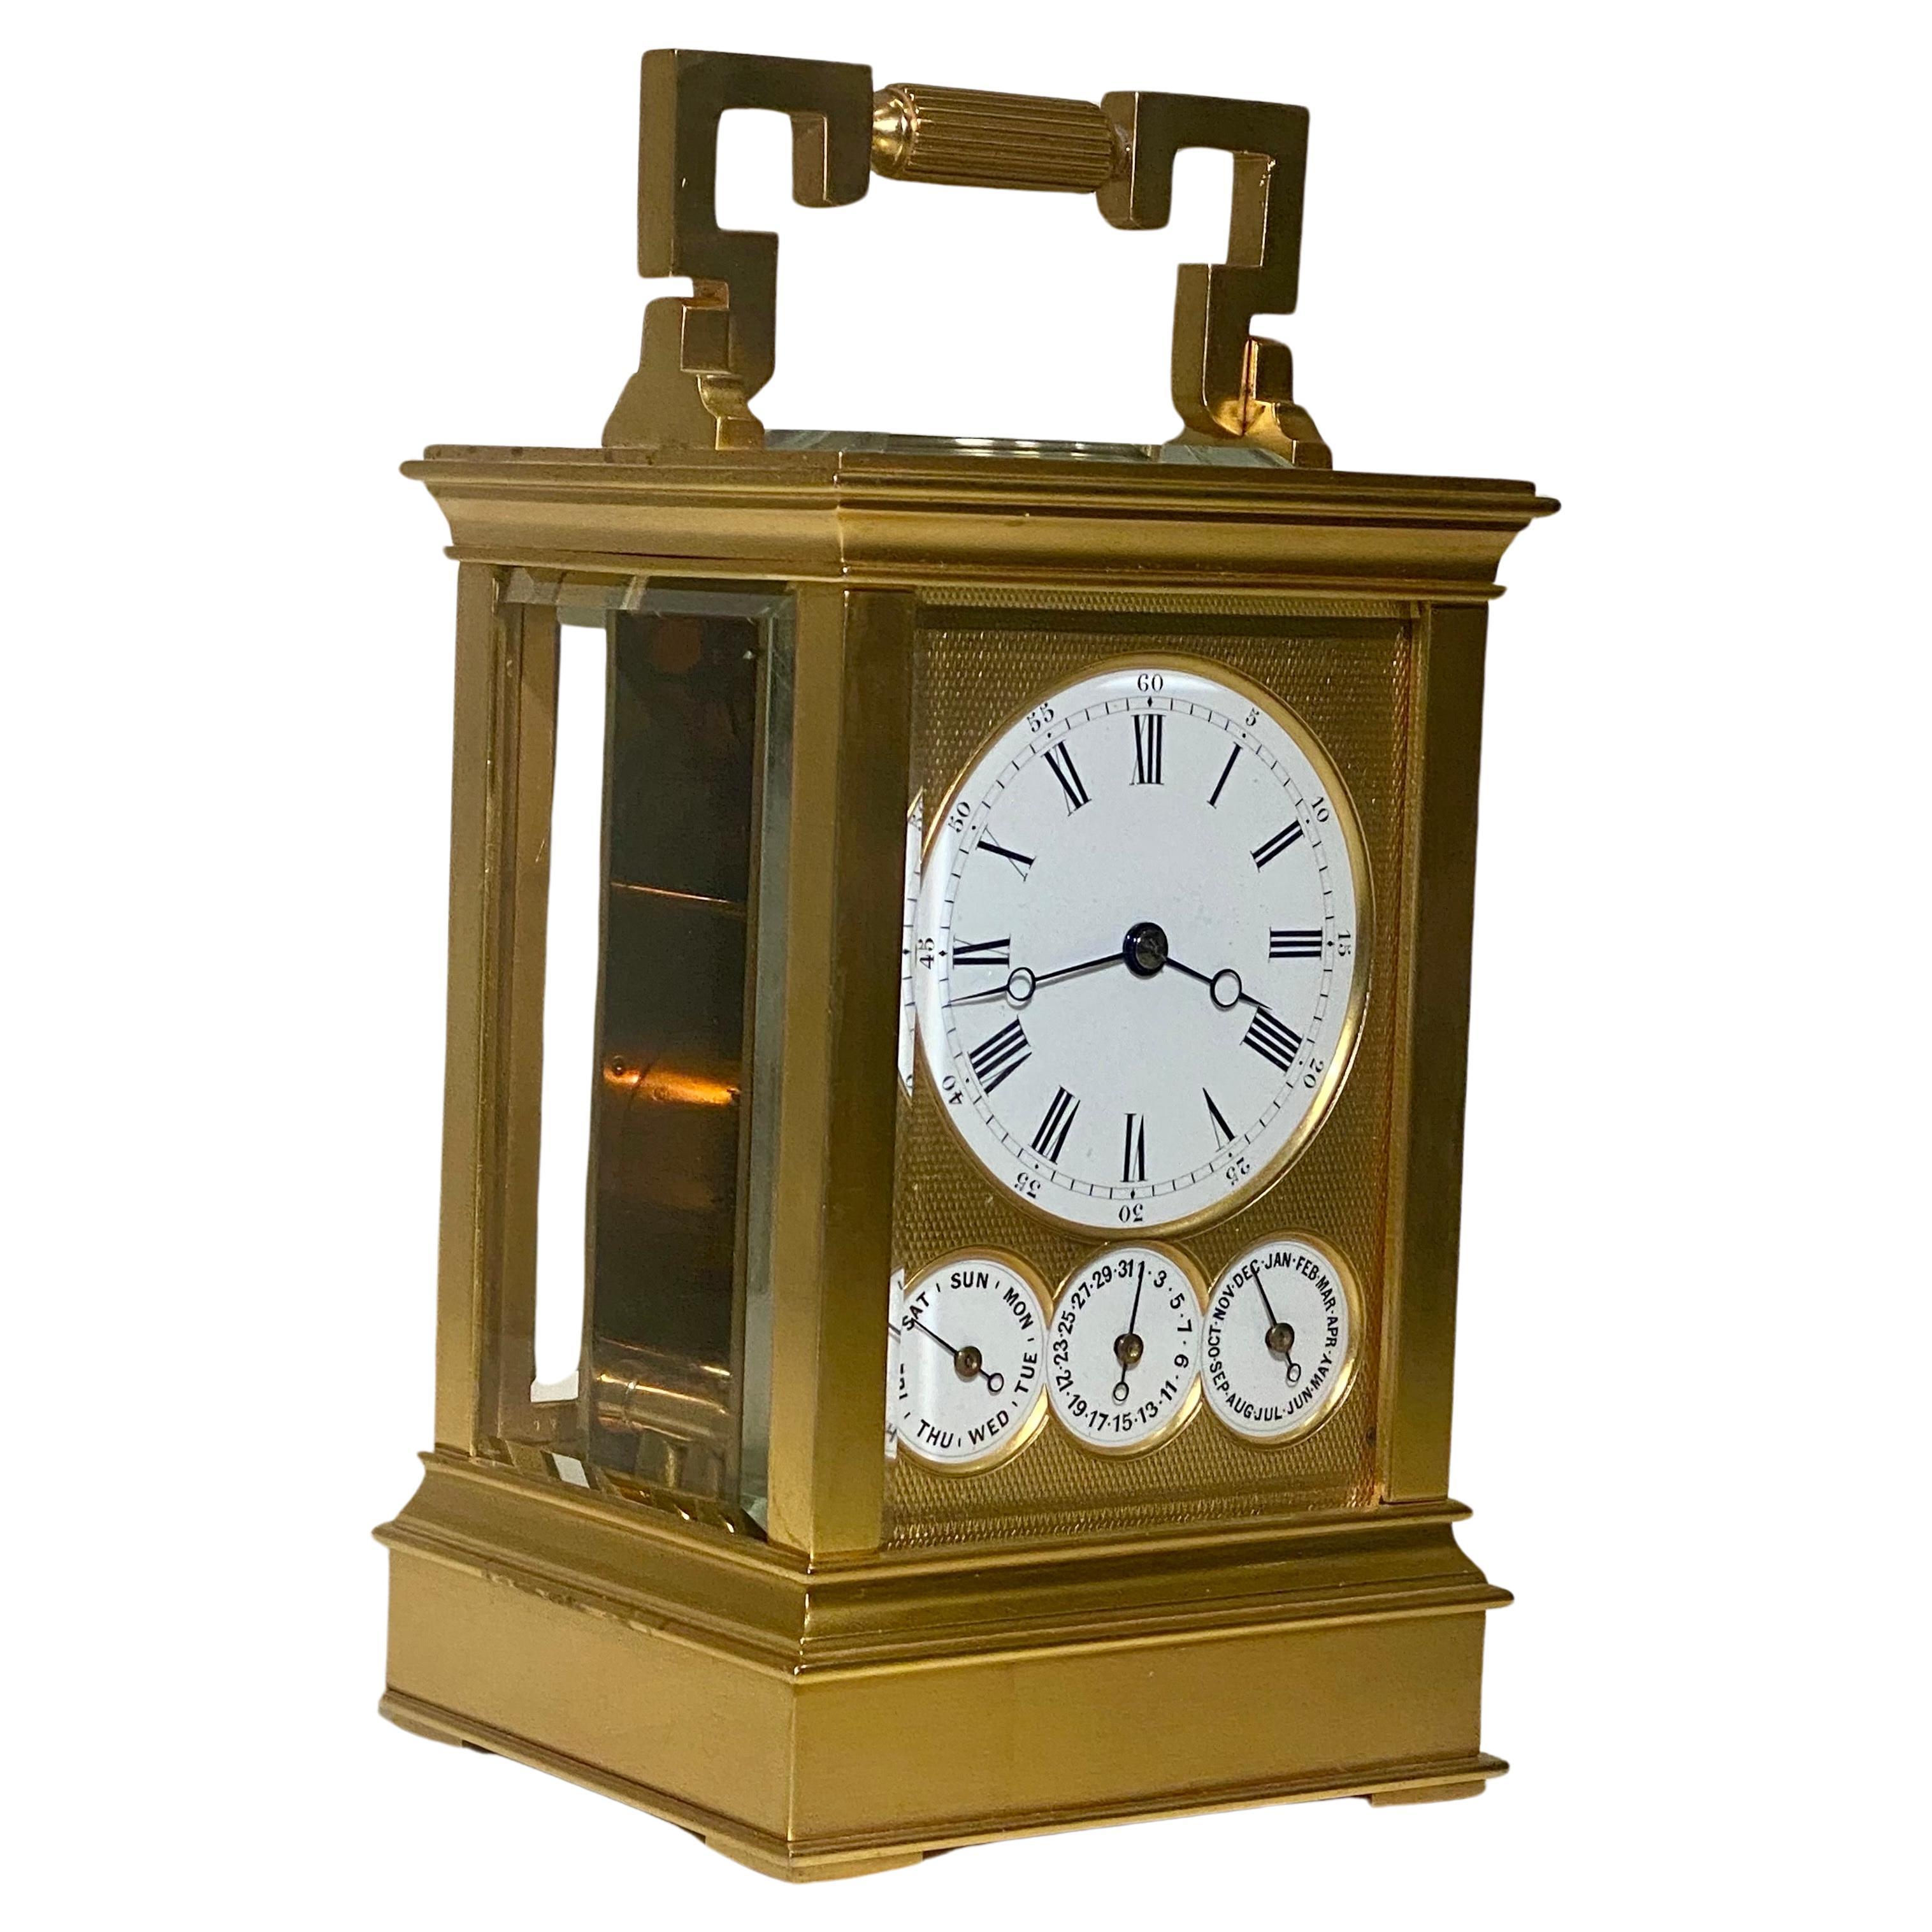 A Drocourt No. 14993: Carriage Clock  circular enamel dial against a gilt mask, The movement bearing Drocourt’s stamp and number
We are pleased to offer this fine and very rare carriage clock of French manufacture dating from the 3rd quarter of the